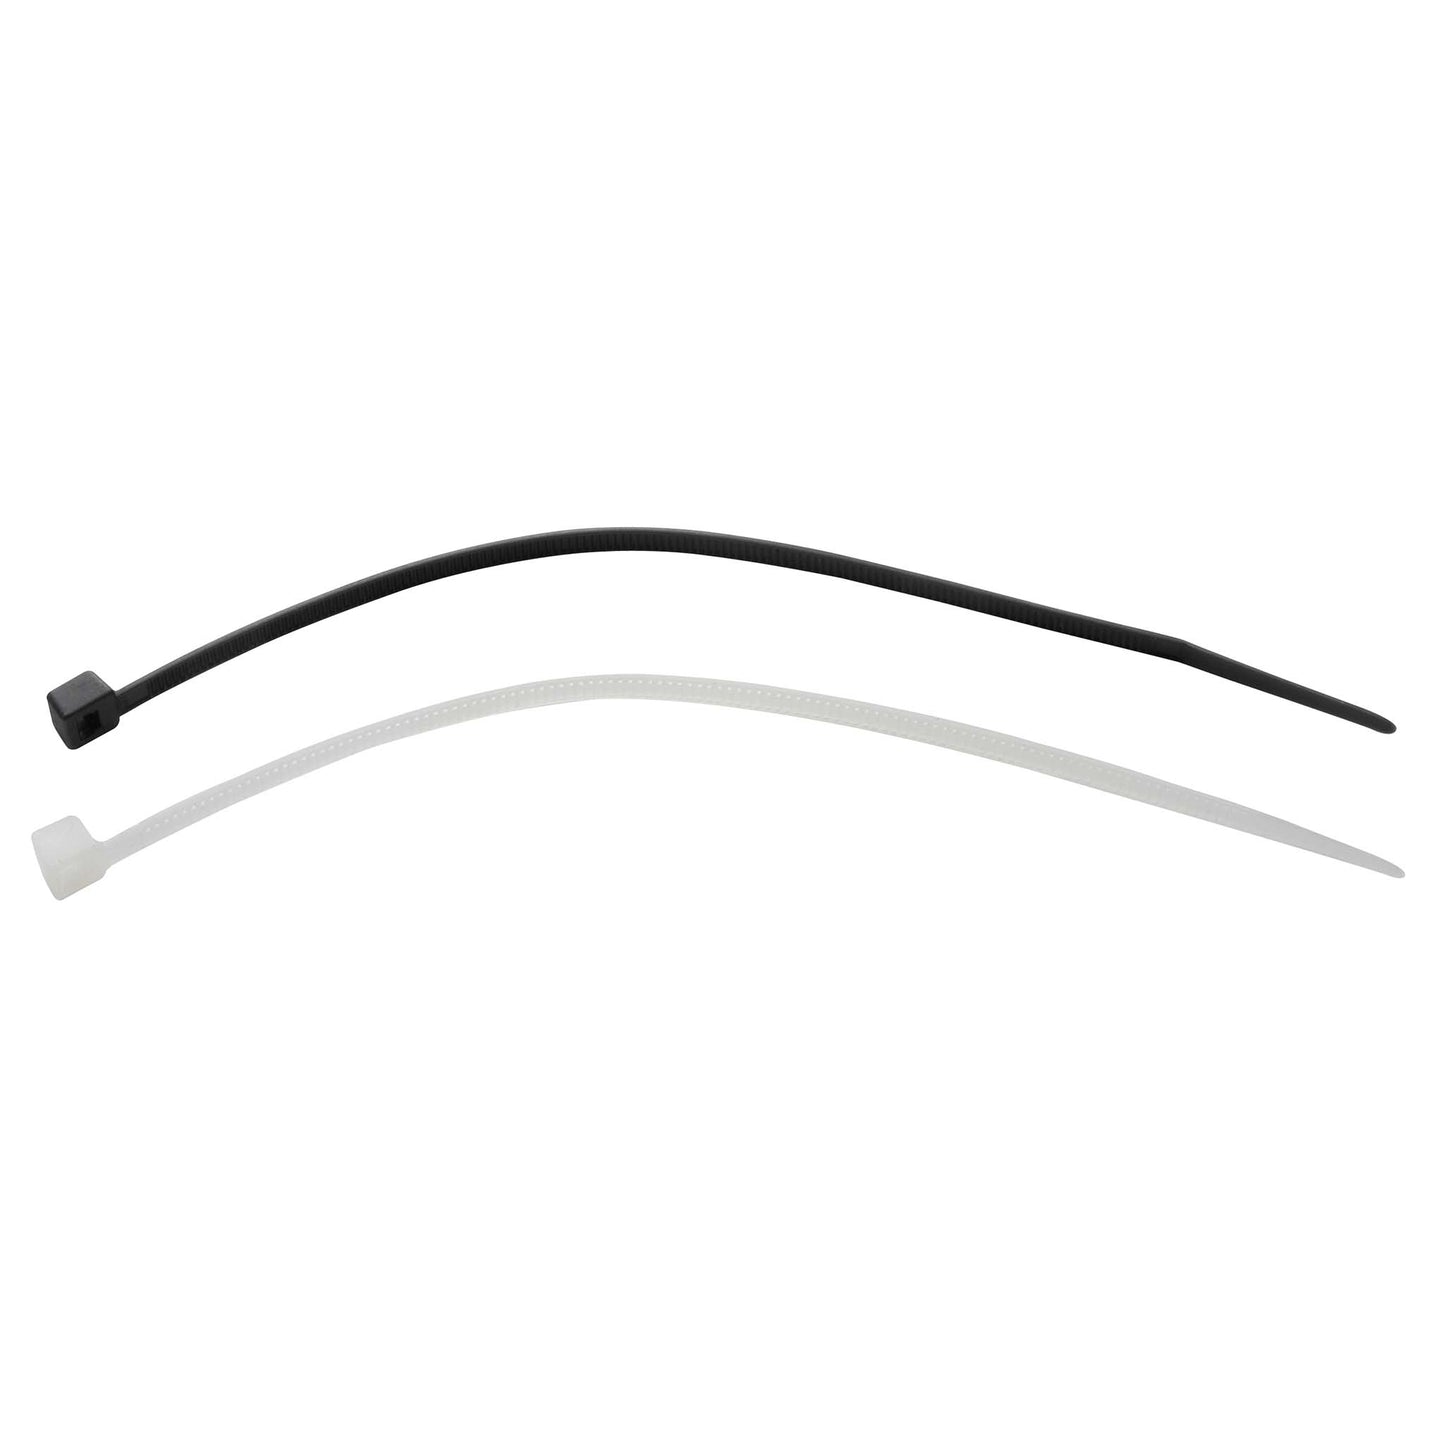 Cable ties 200 x 2.5 mm - black